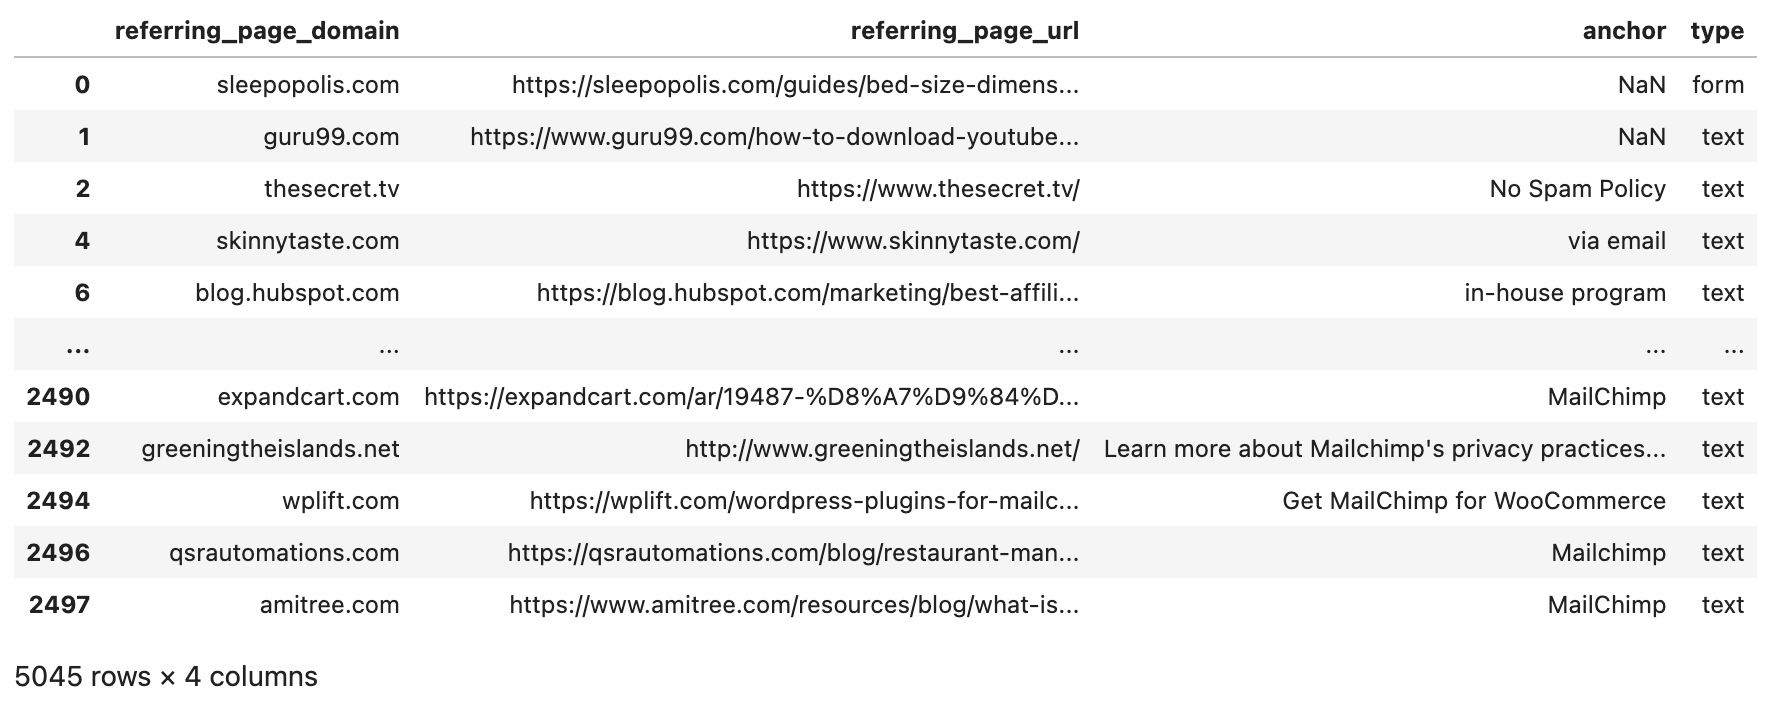 Some example URLs for each domain